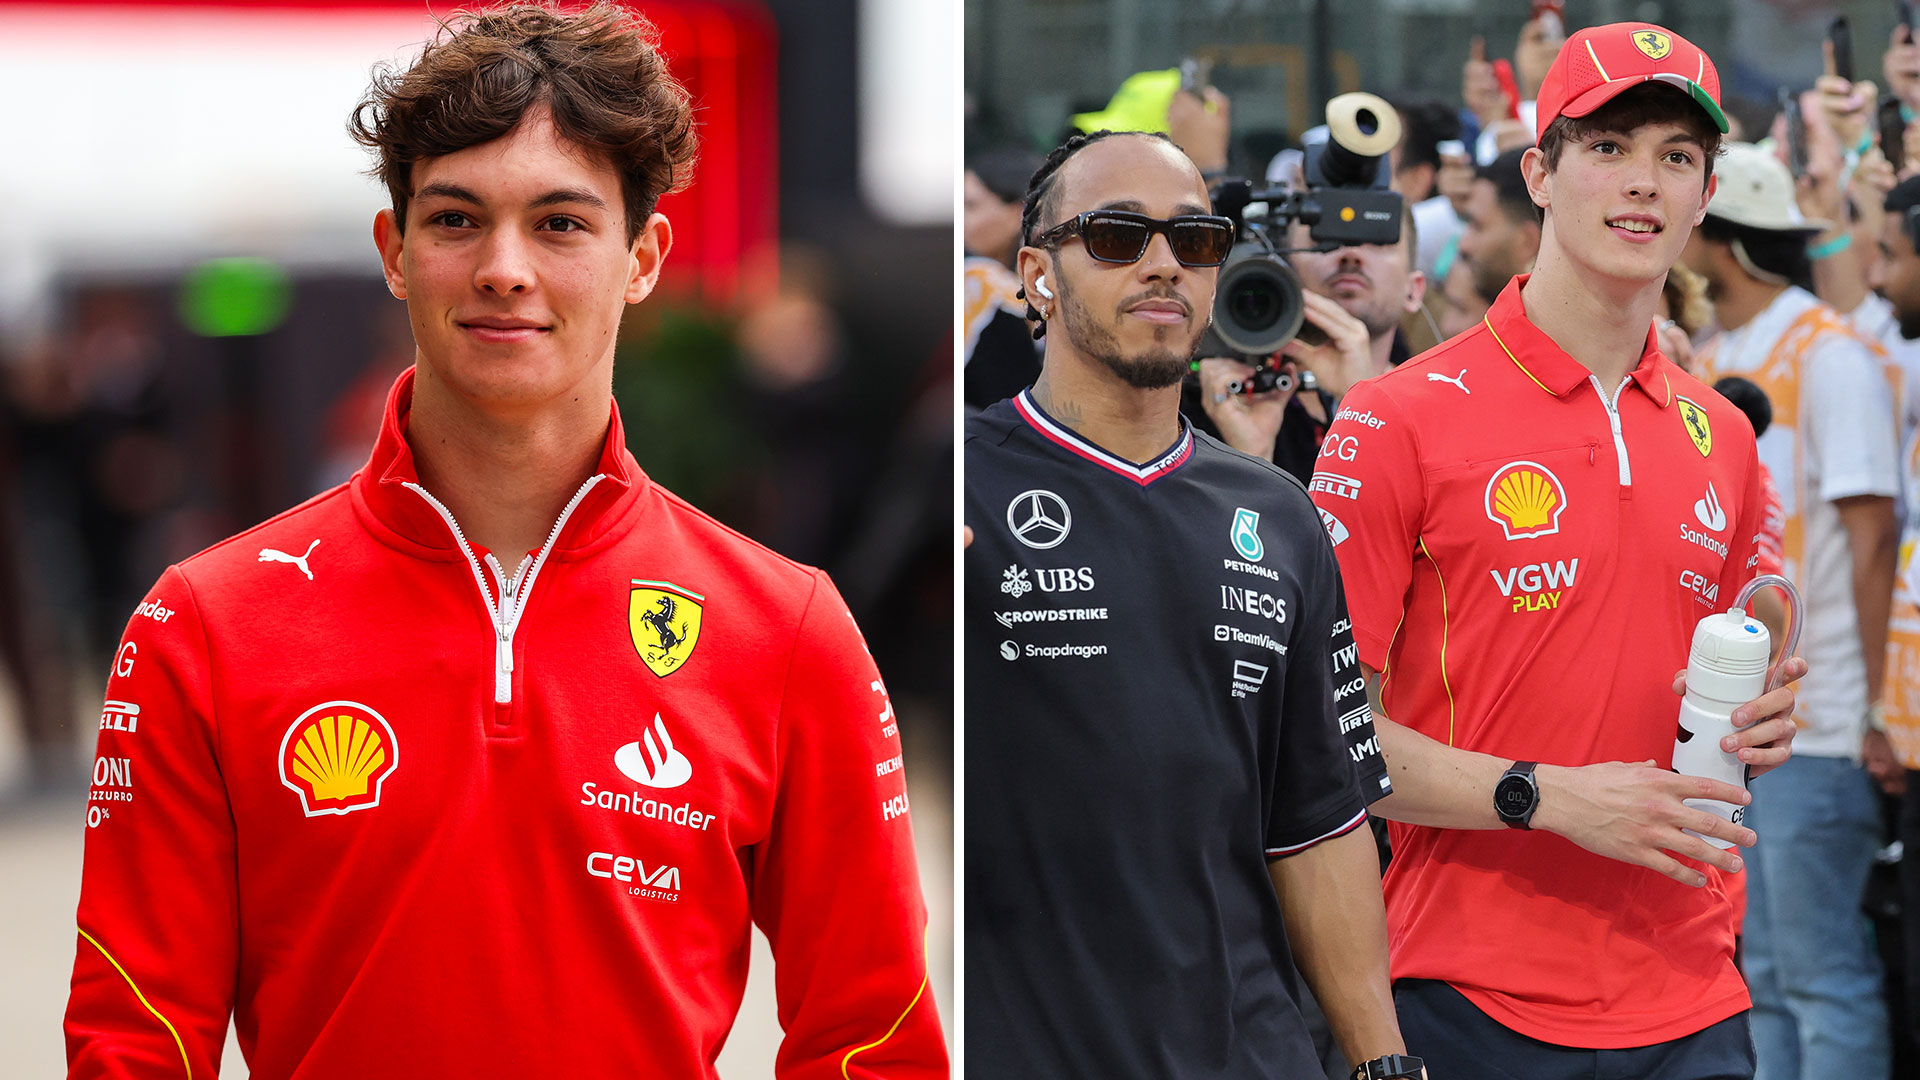 British F1 wonderkid Oliver Bearman, 18, lined up for 2025 seat after breakthrough year to replace fan-favourite racer [Video]